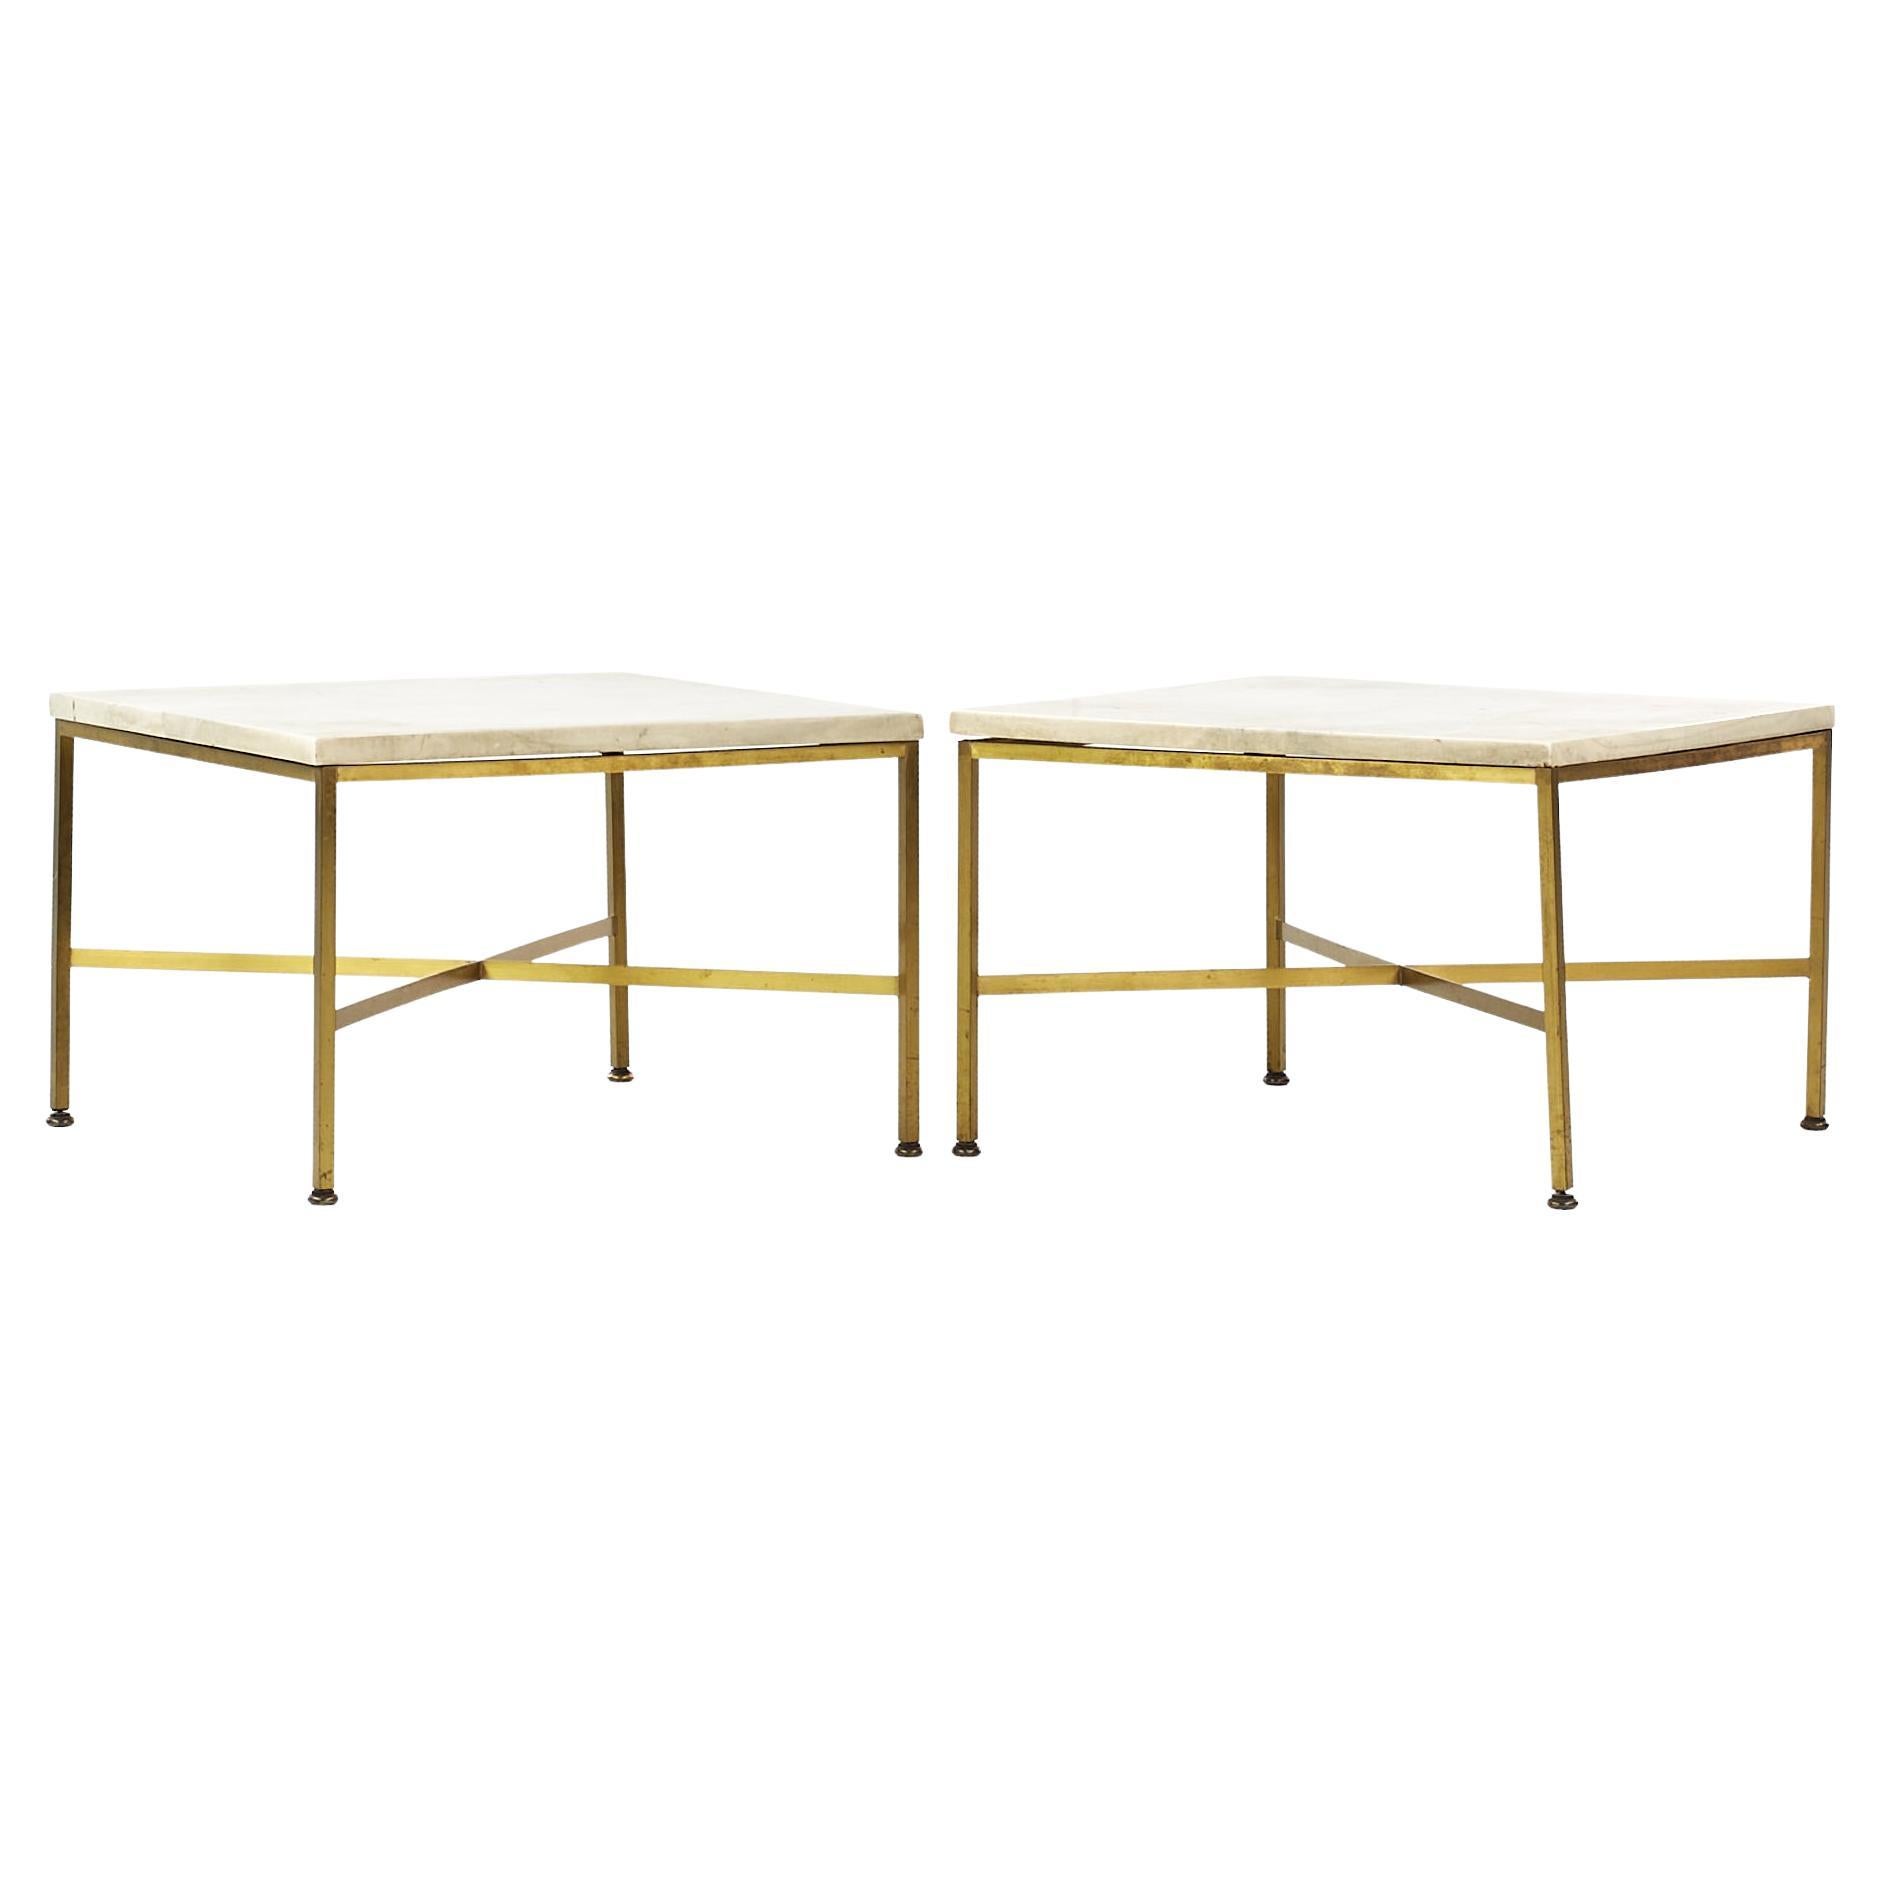 SOLD 11/10/23 Paul McCobb Mid Century Brass X Base Side Tables -  Pair